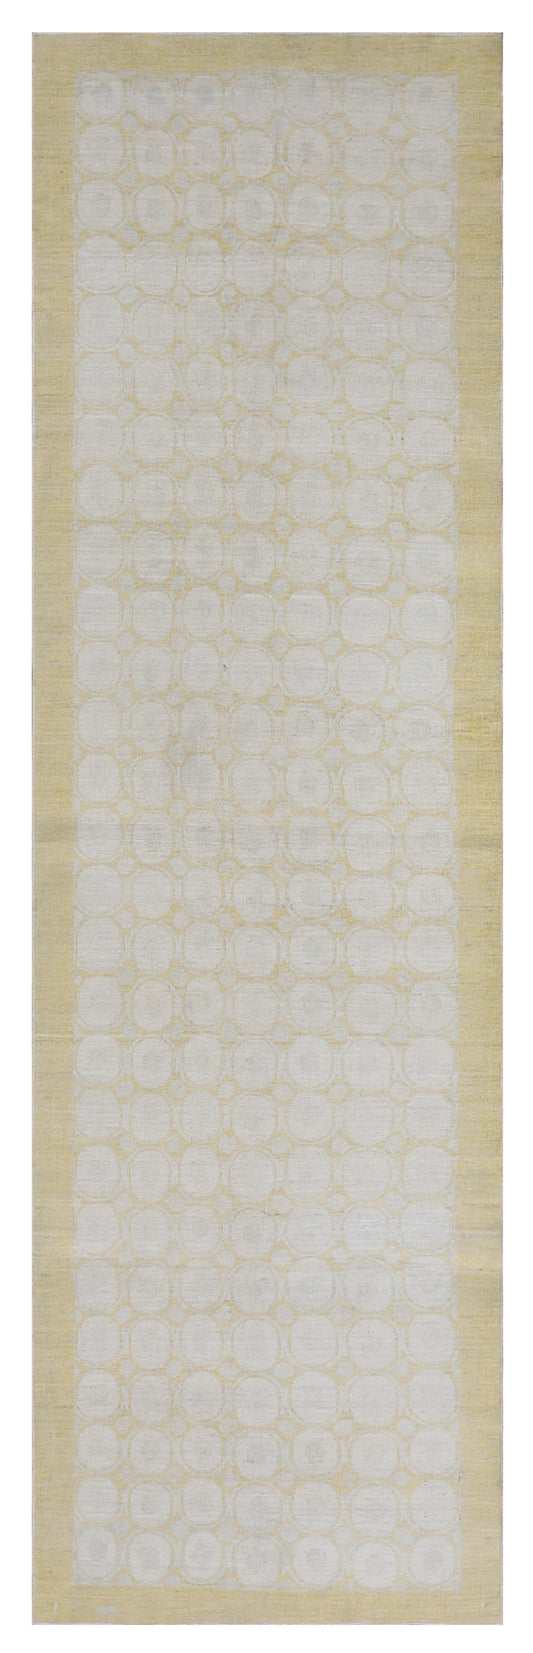 3'x10' Timeless Contemporary Design Hand-Knotted Ariana Runner Rug